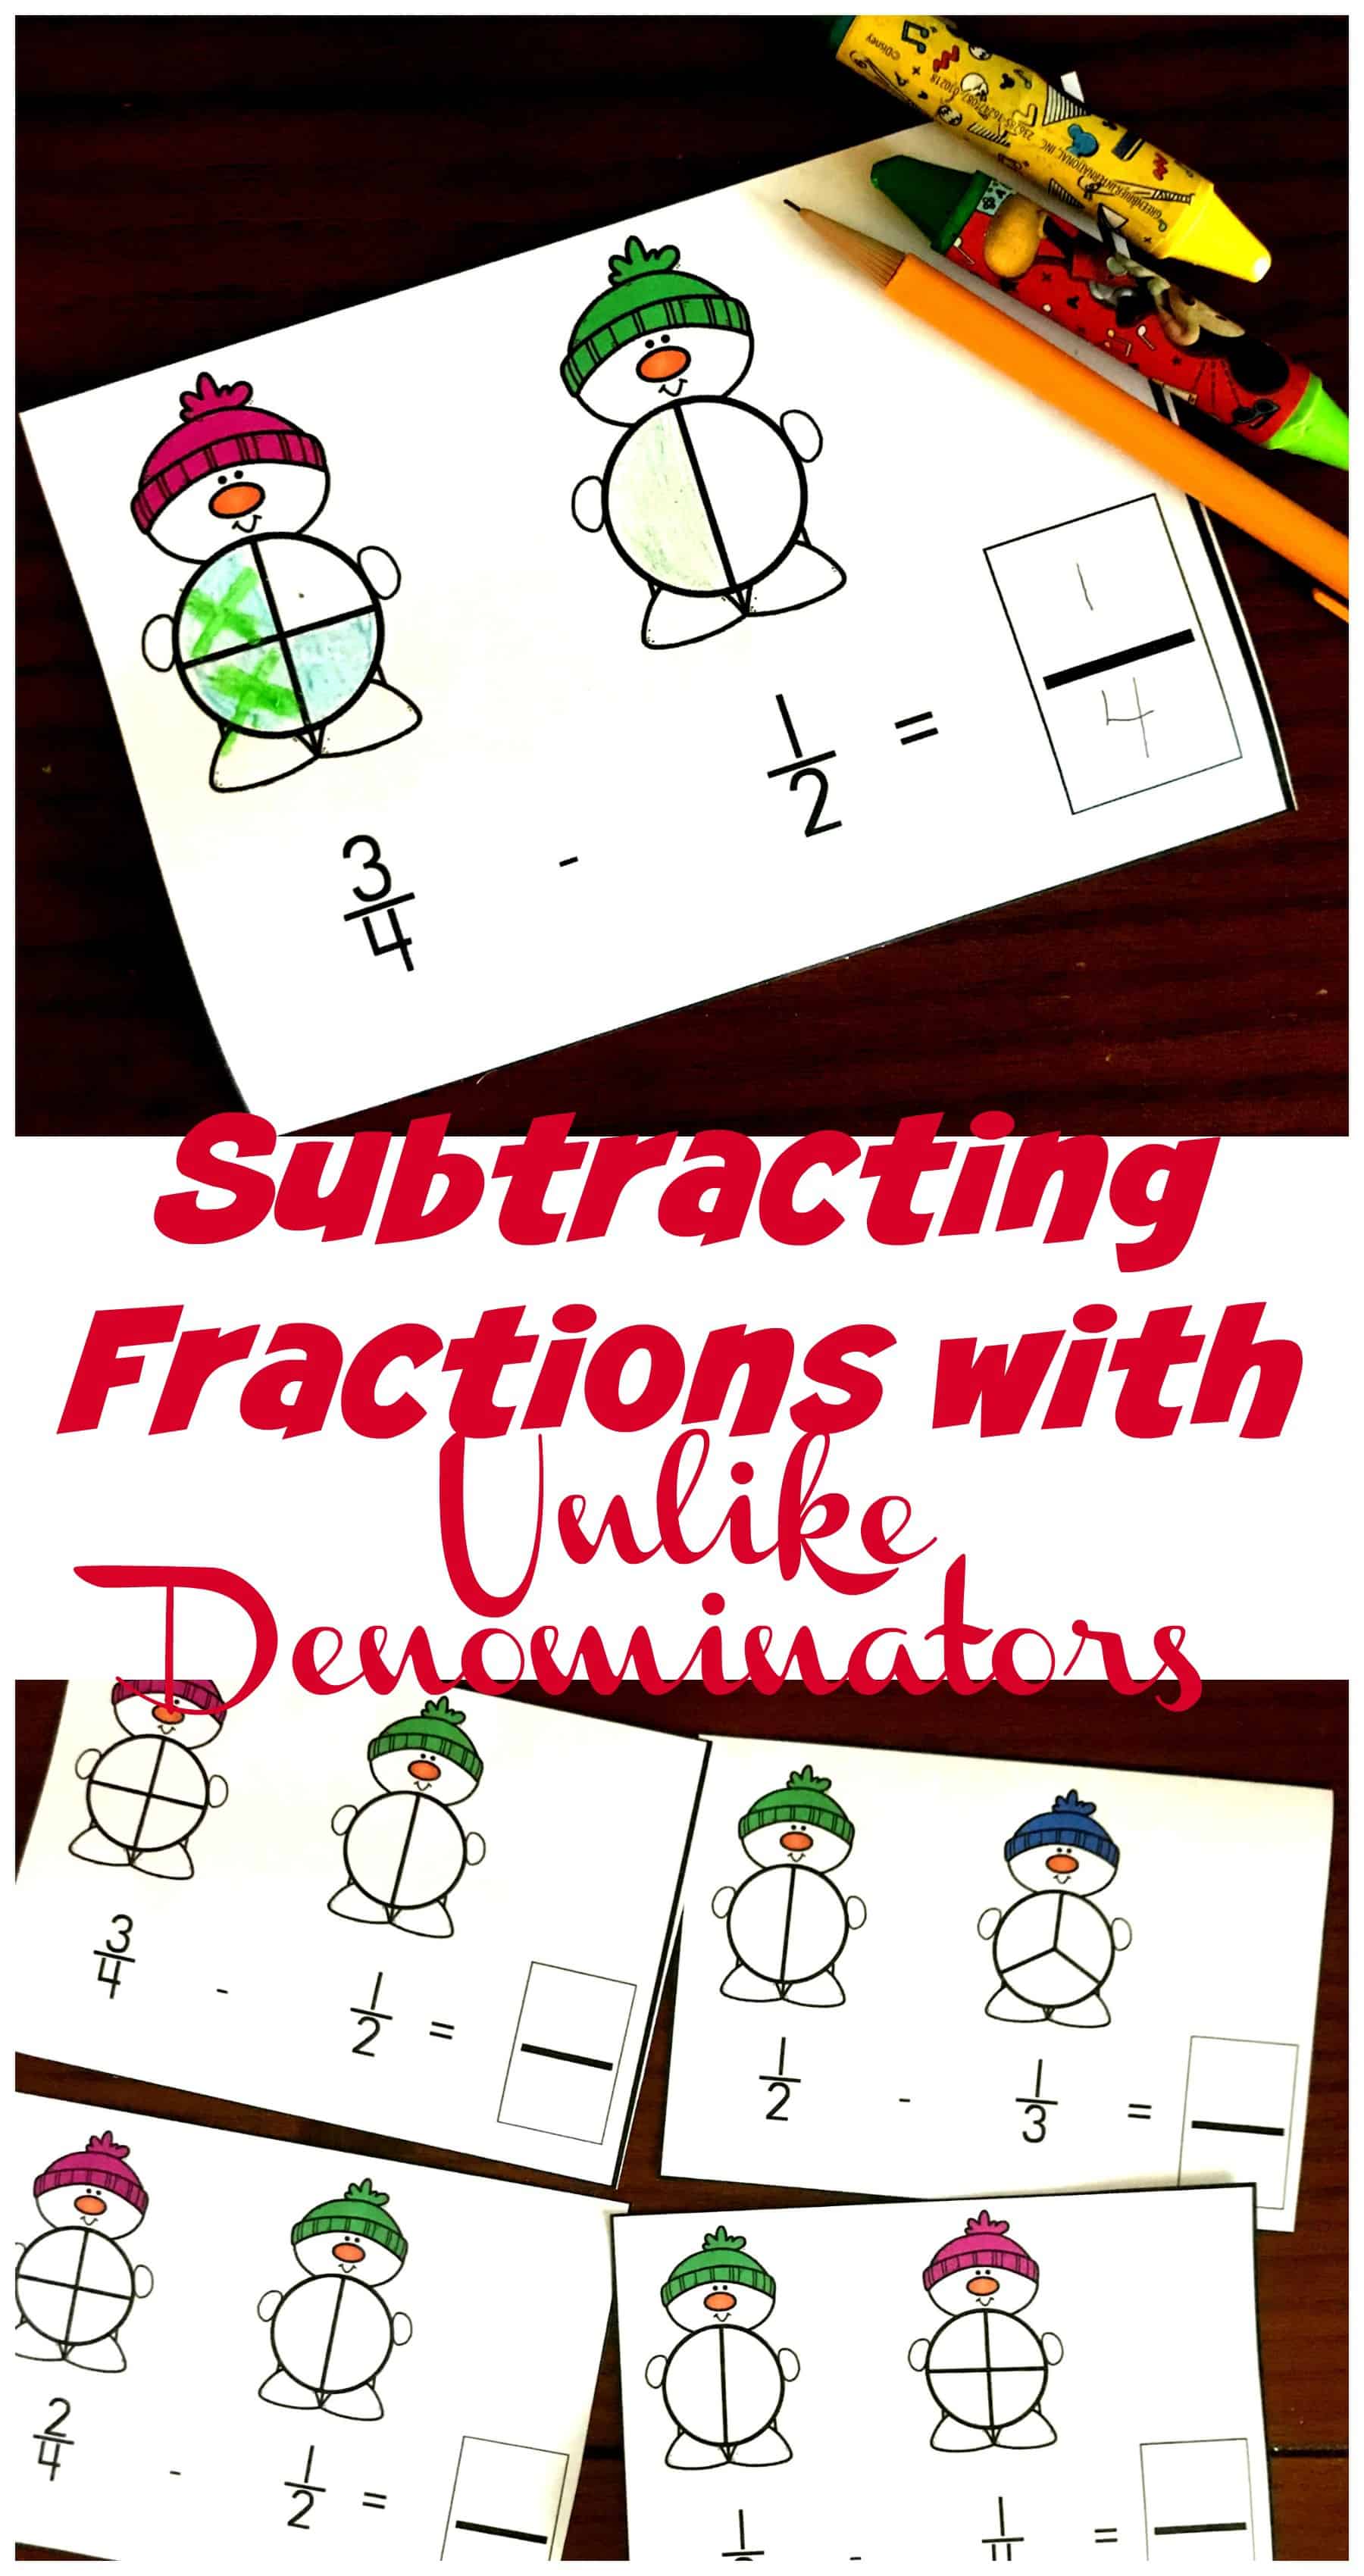 Grab these adorable snowmen to help children model subtracting with, unlike denominators. They are a fun, visual way to practice this skill.